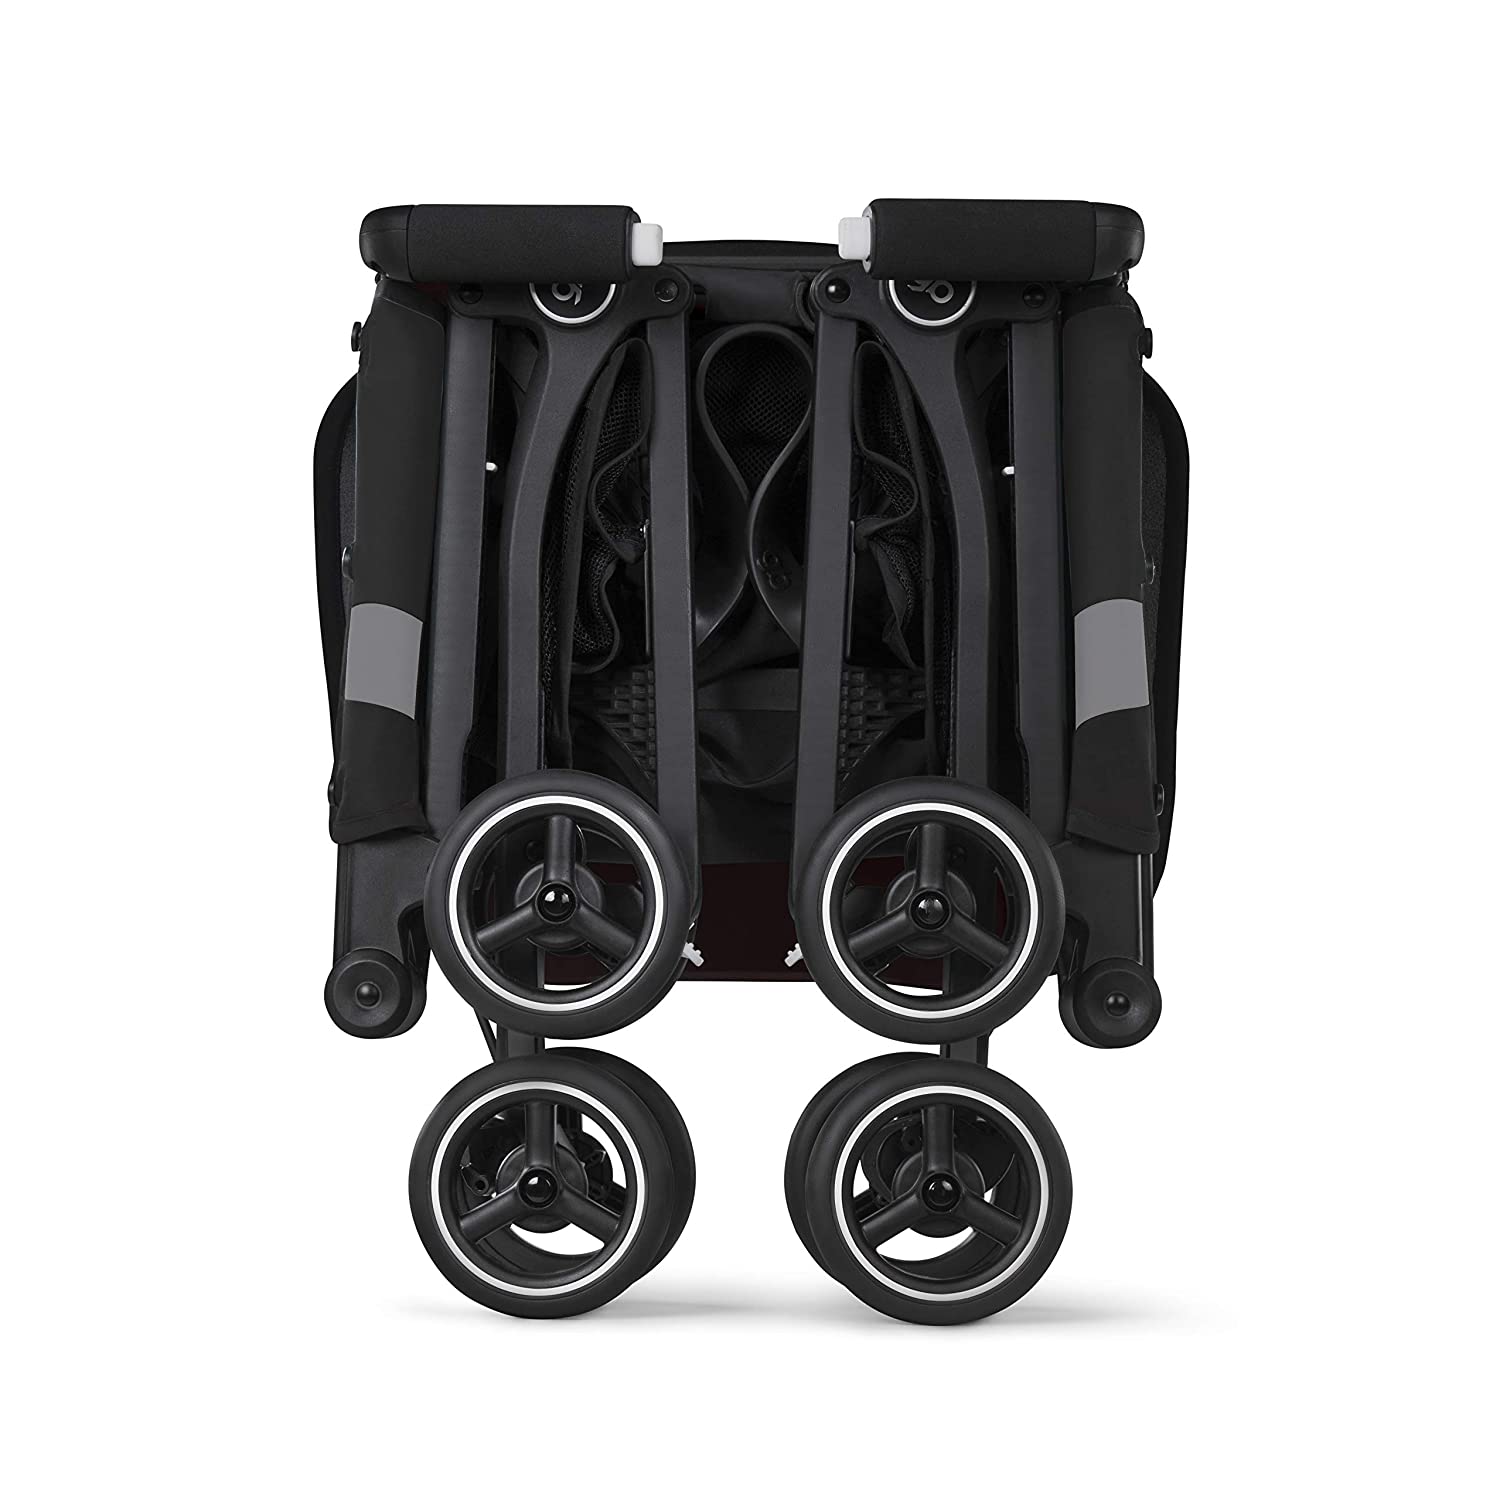 An ultra-compact lightweight travel stroller that has been folded down to a small size.